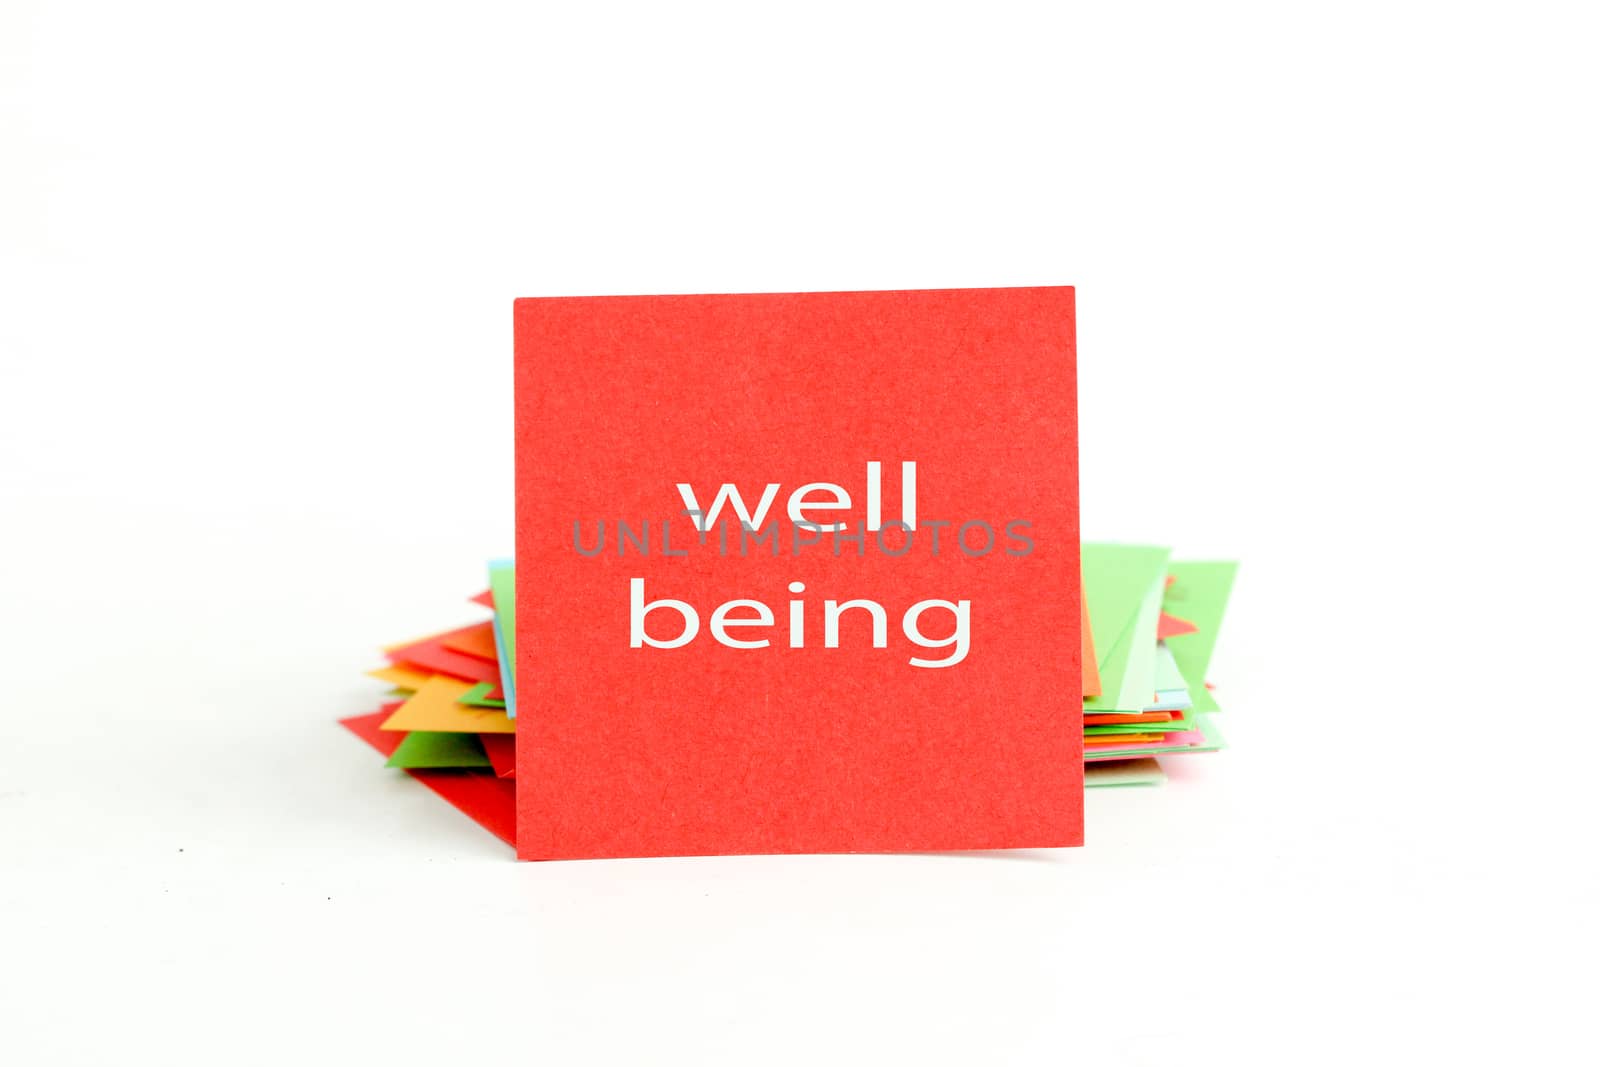 picture of a red note paper with text well being